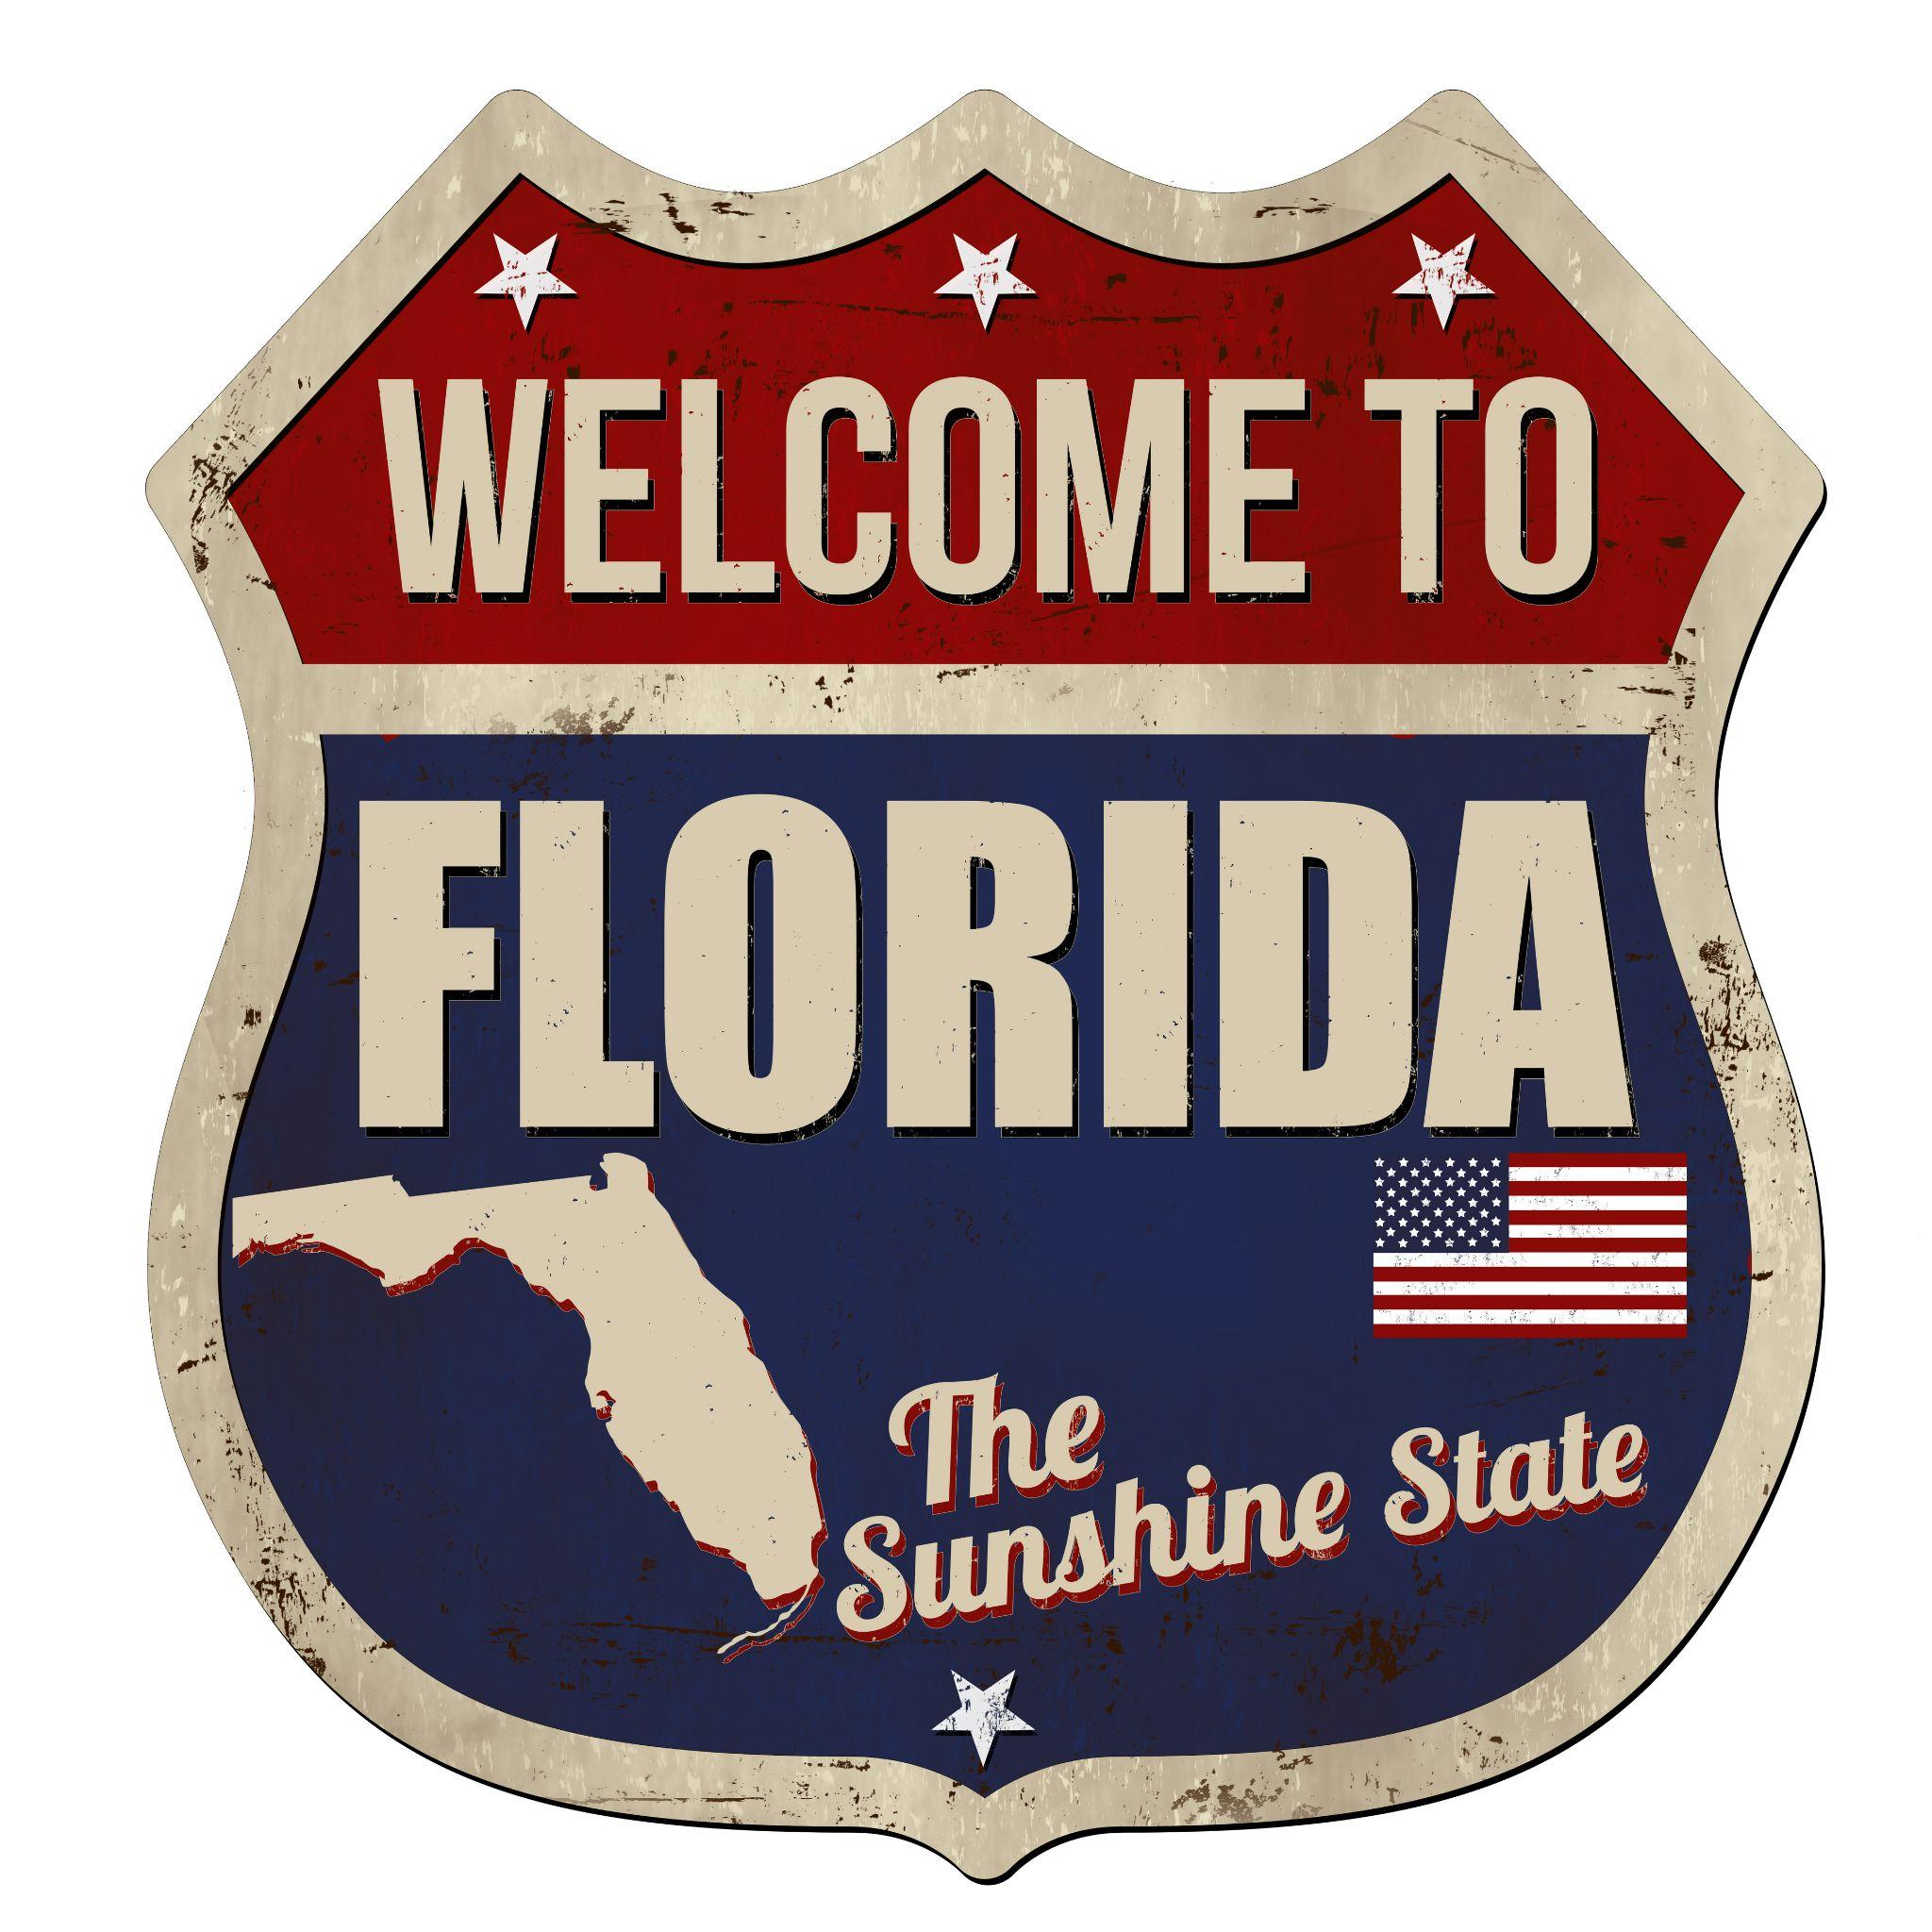 Welcome to Florida - grunde sign